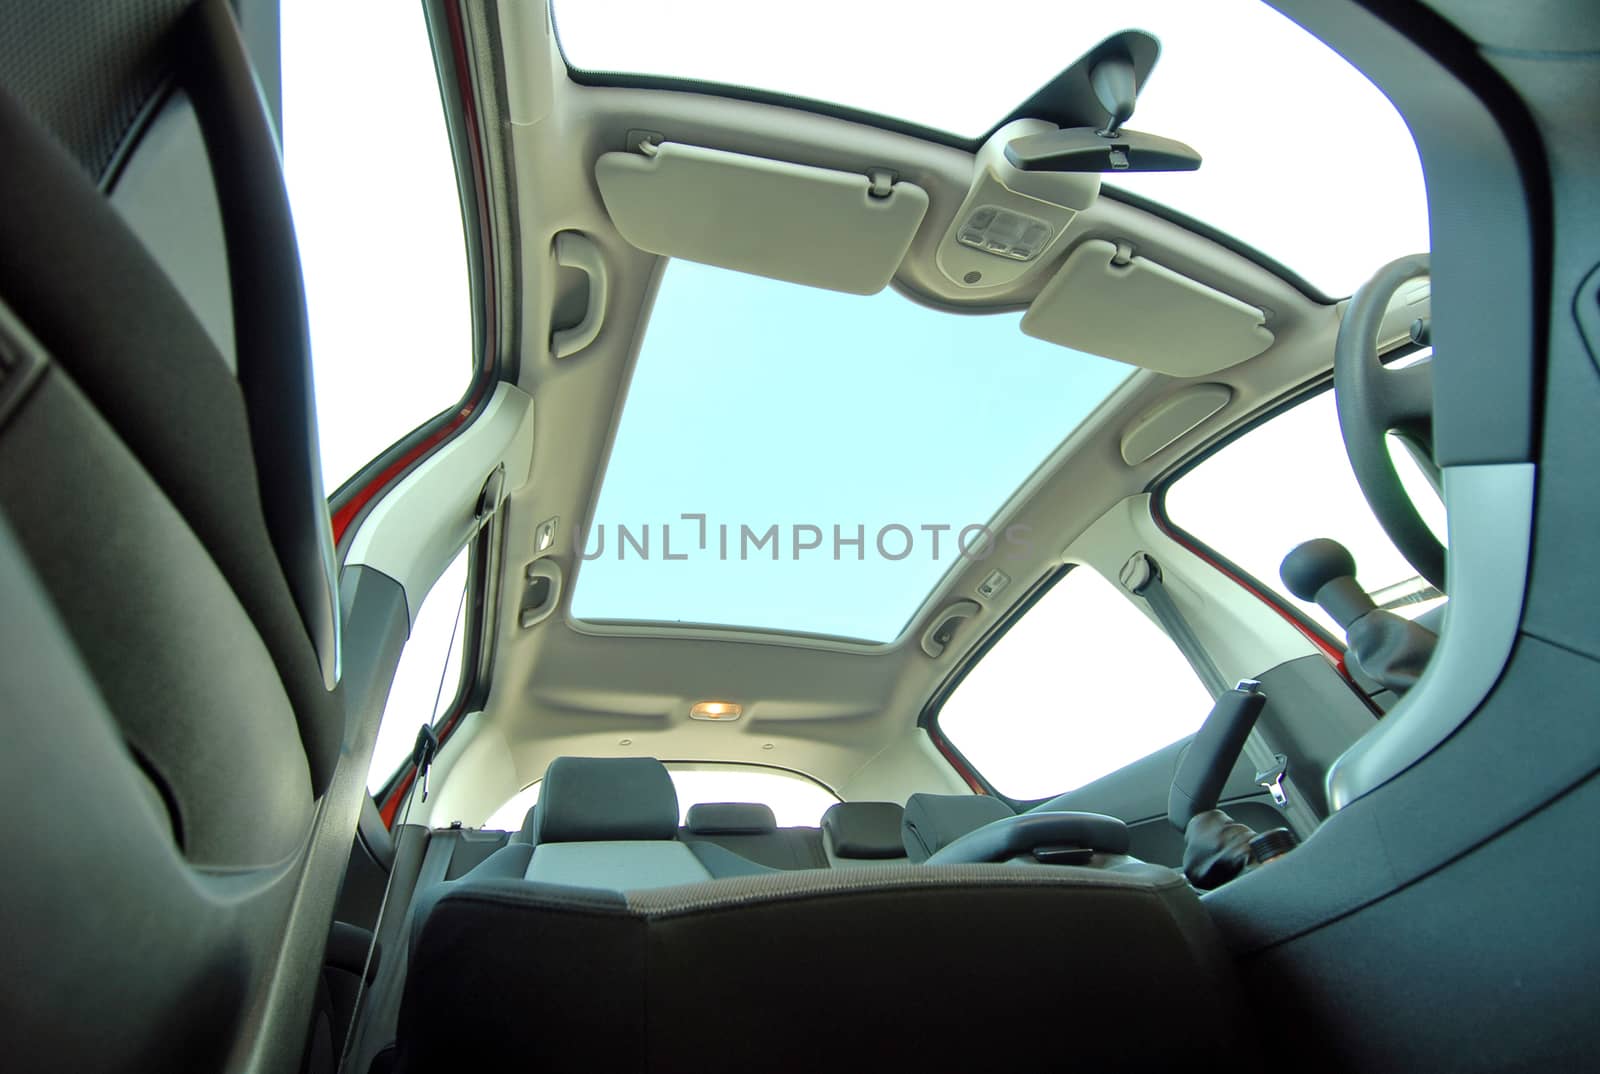 Panoramic sunroof in a passenger car by aselsa